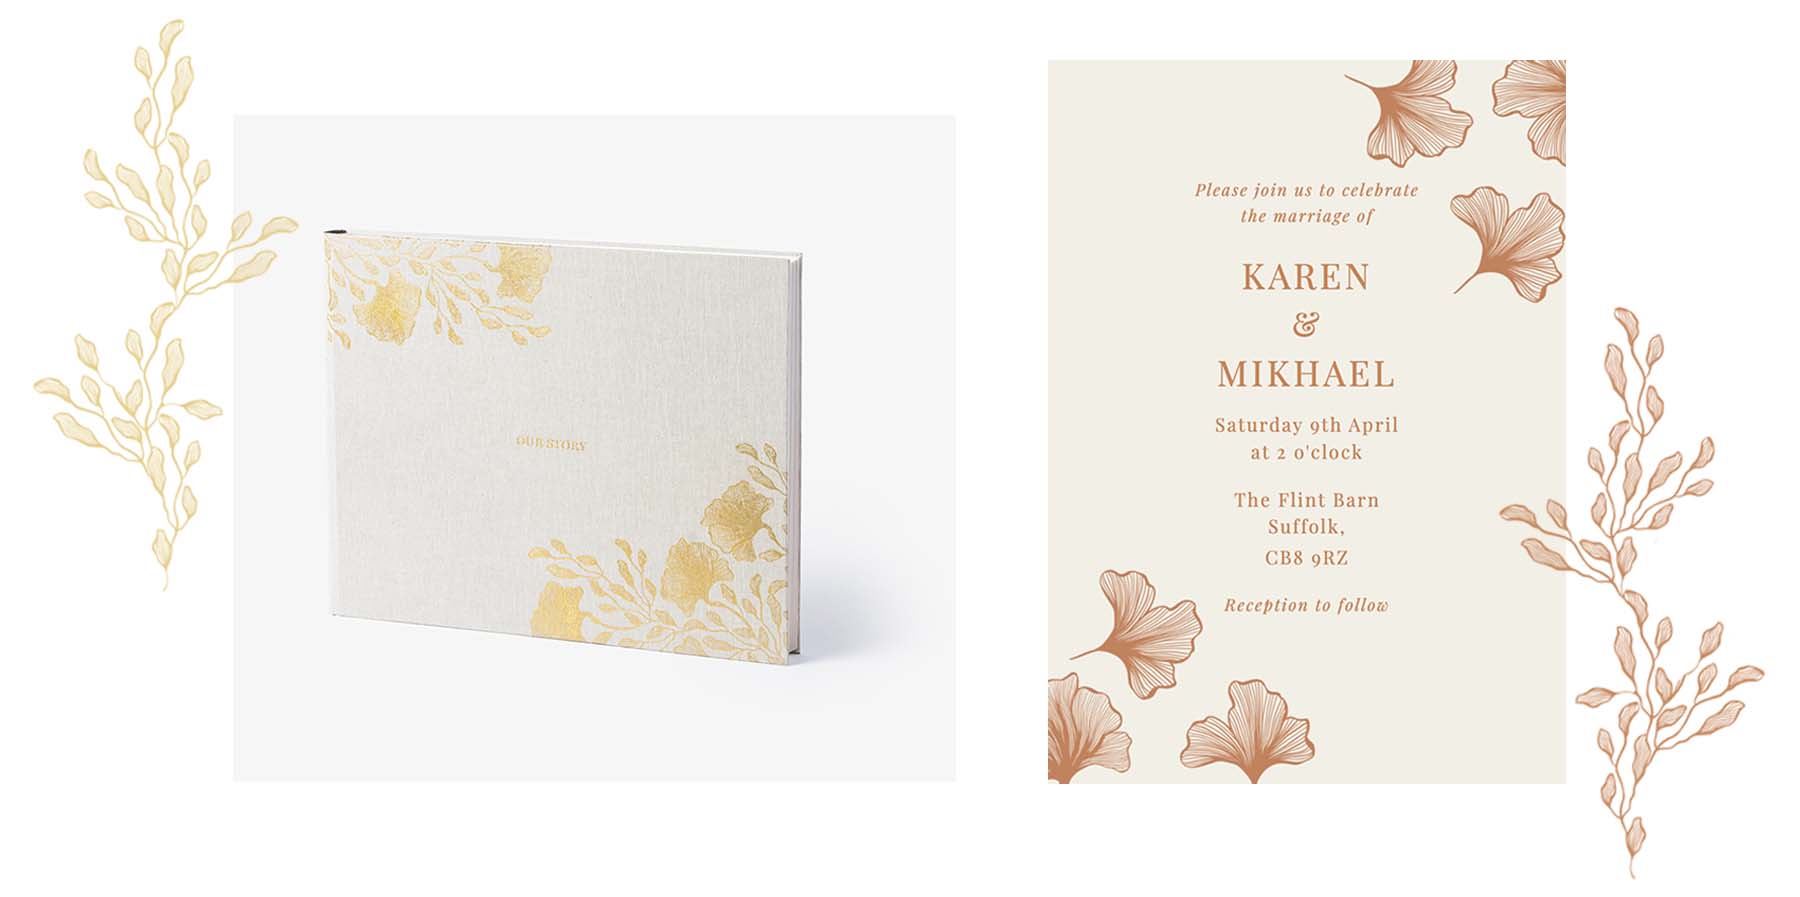 A photo album and wedding invitation with ginkgo leaves, in gold, cream and brown colours